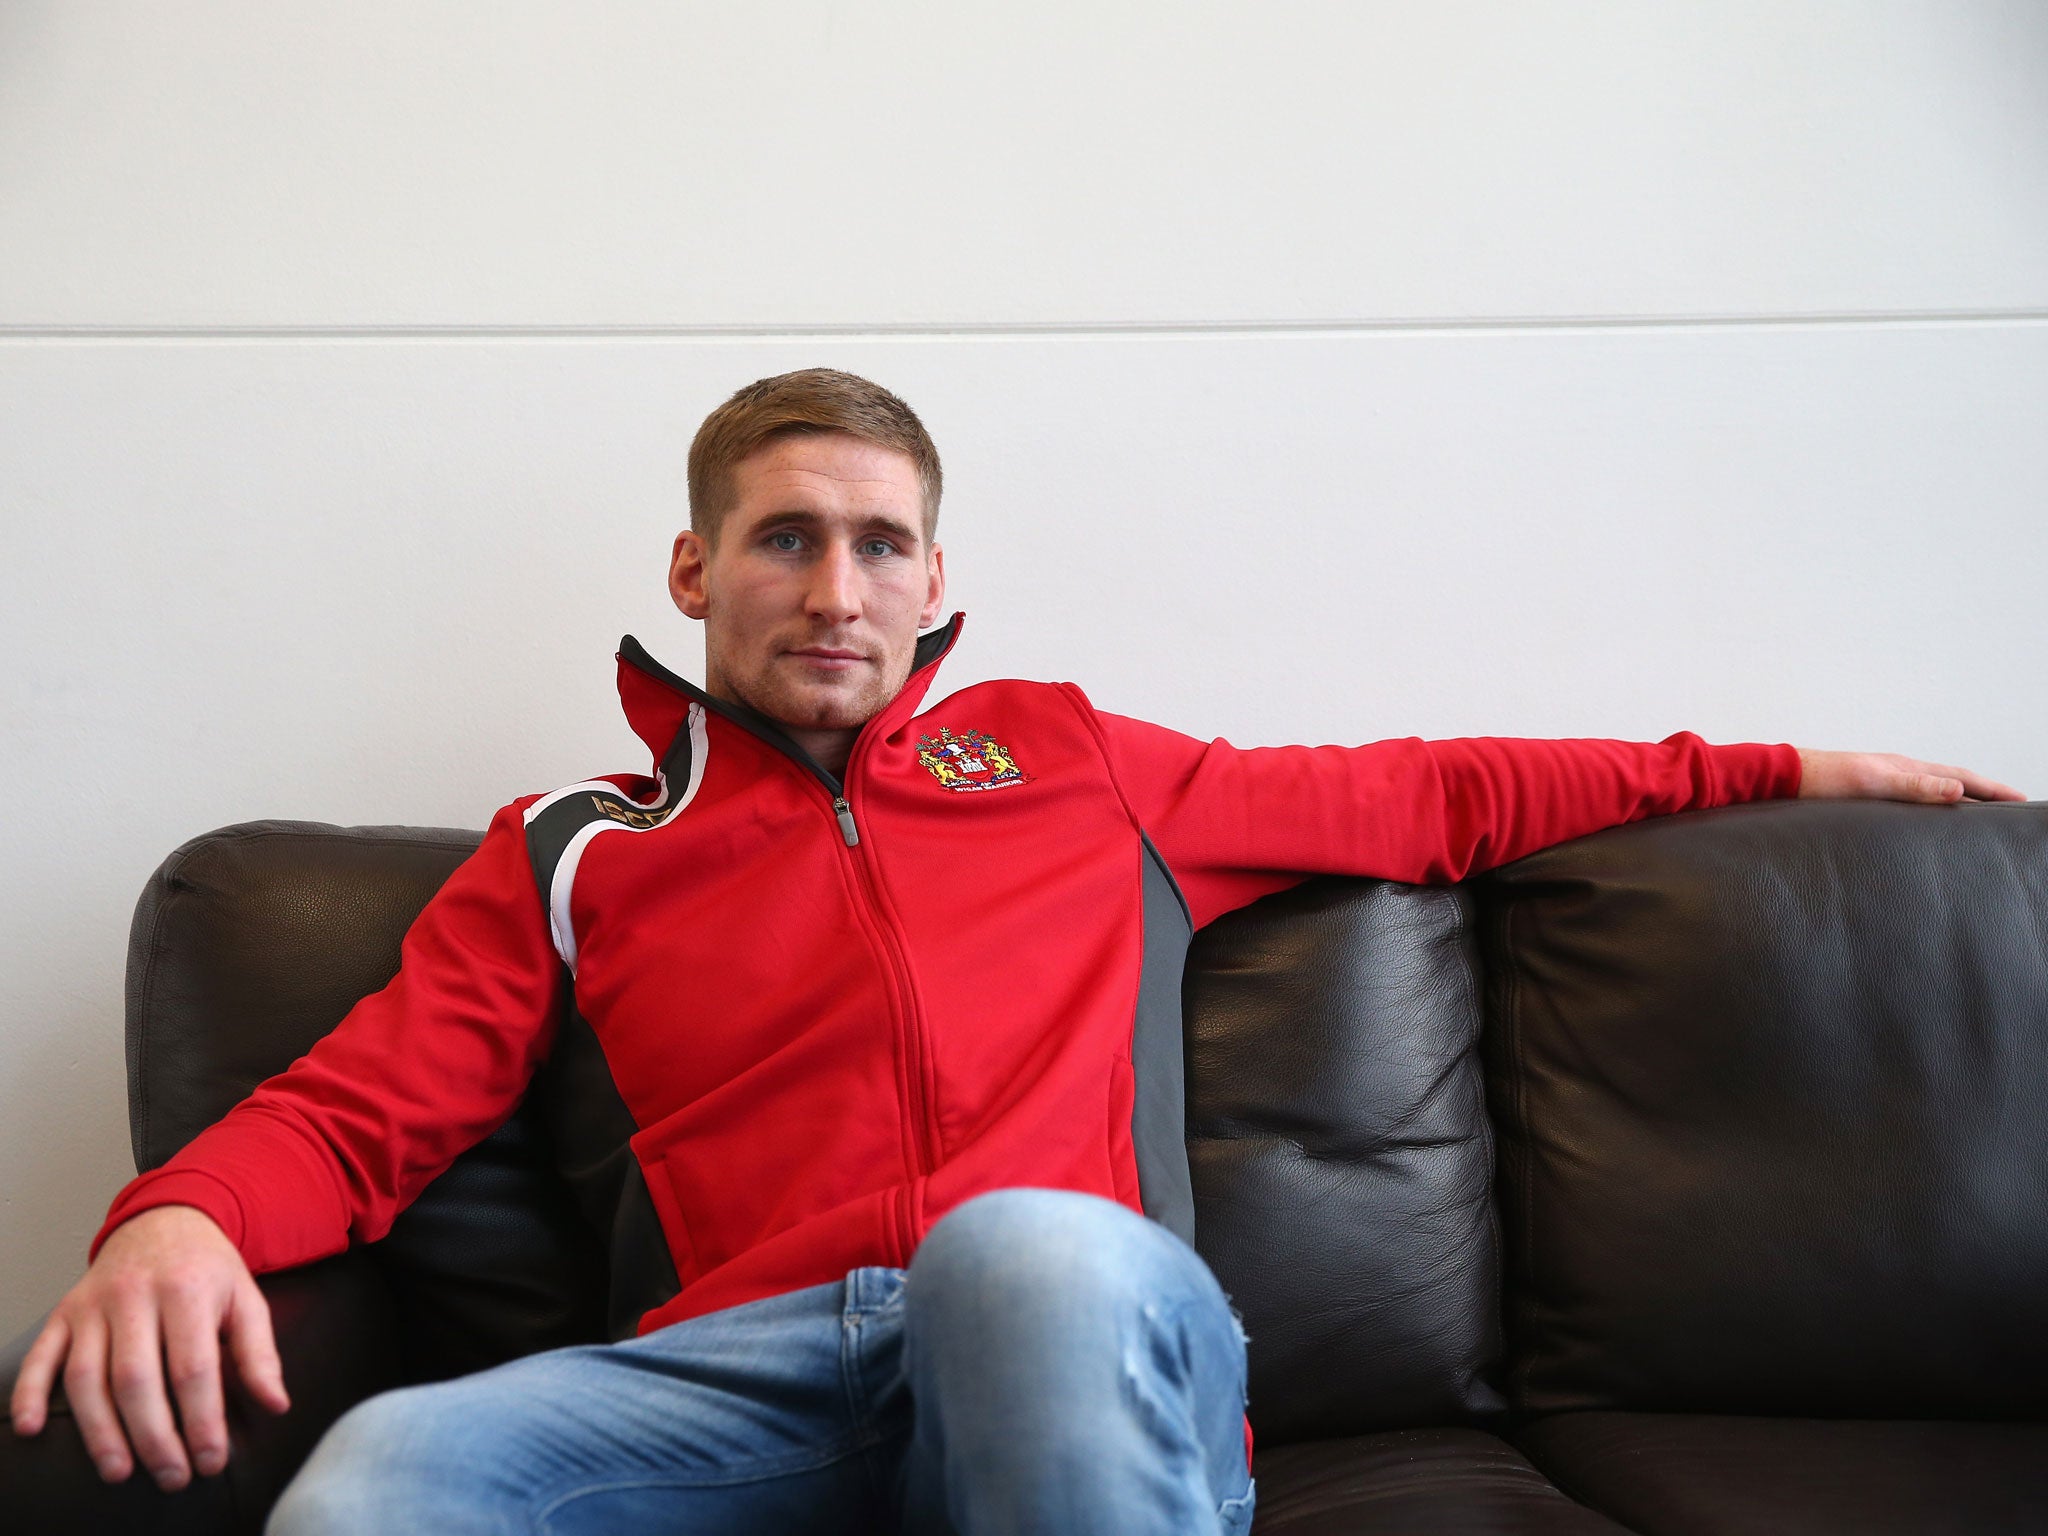 Hot seat: Wigan have become reliant on Sam Tomkins who will be a key figure in Saturday’s Challenge Cup final